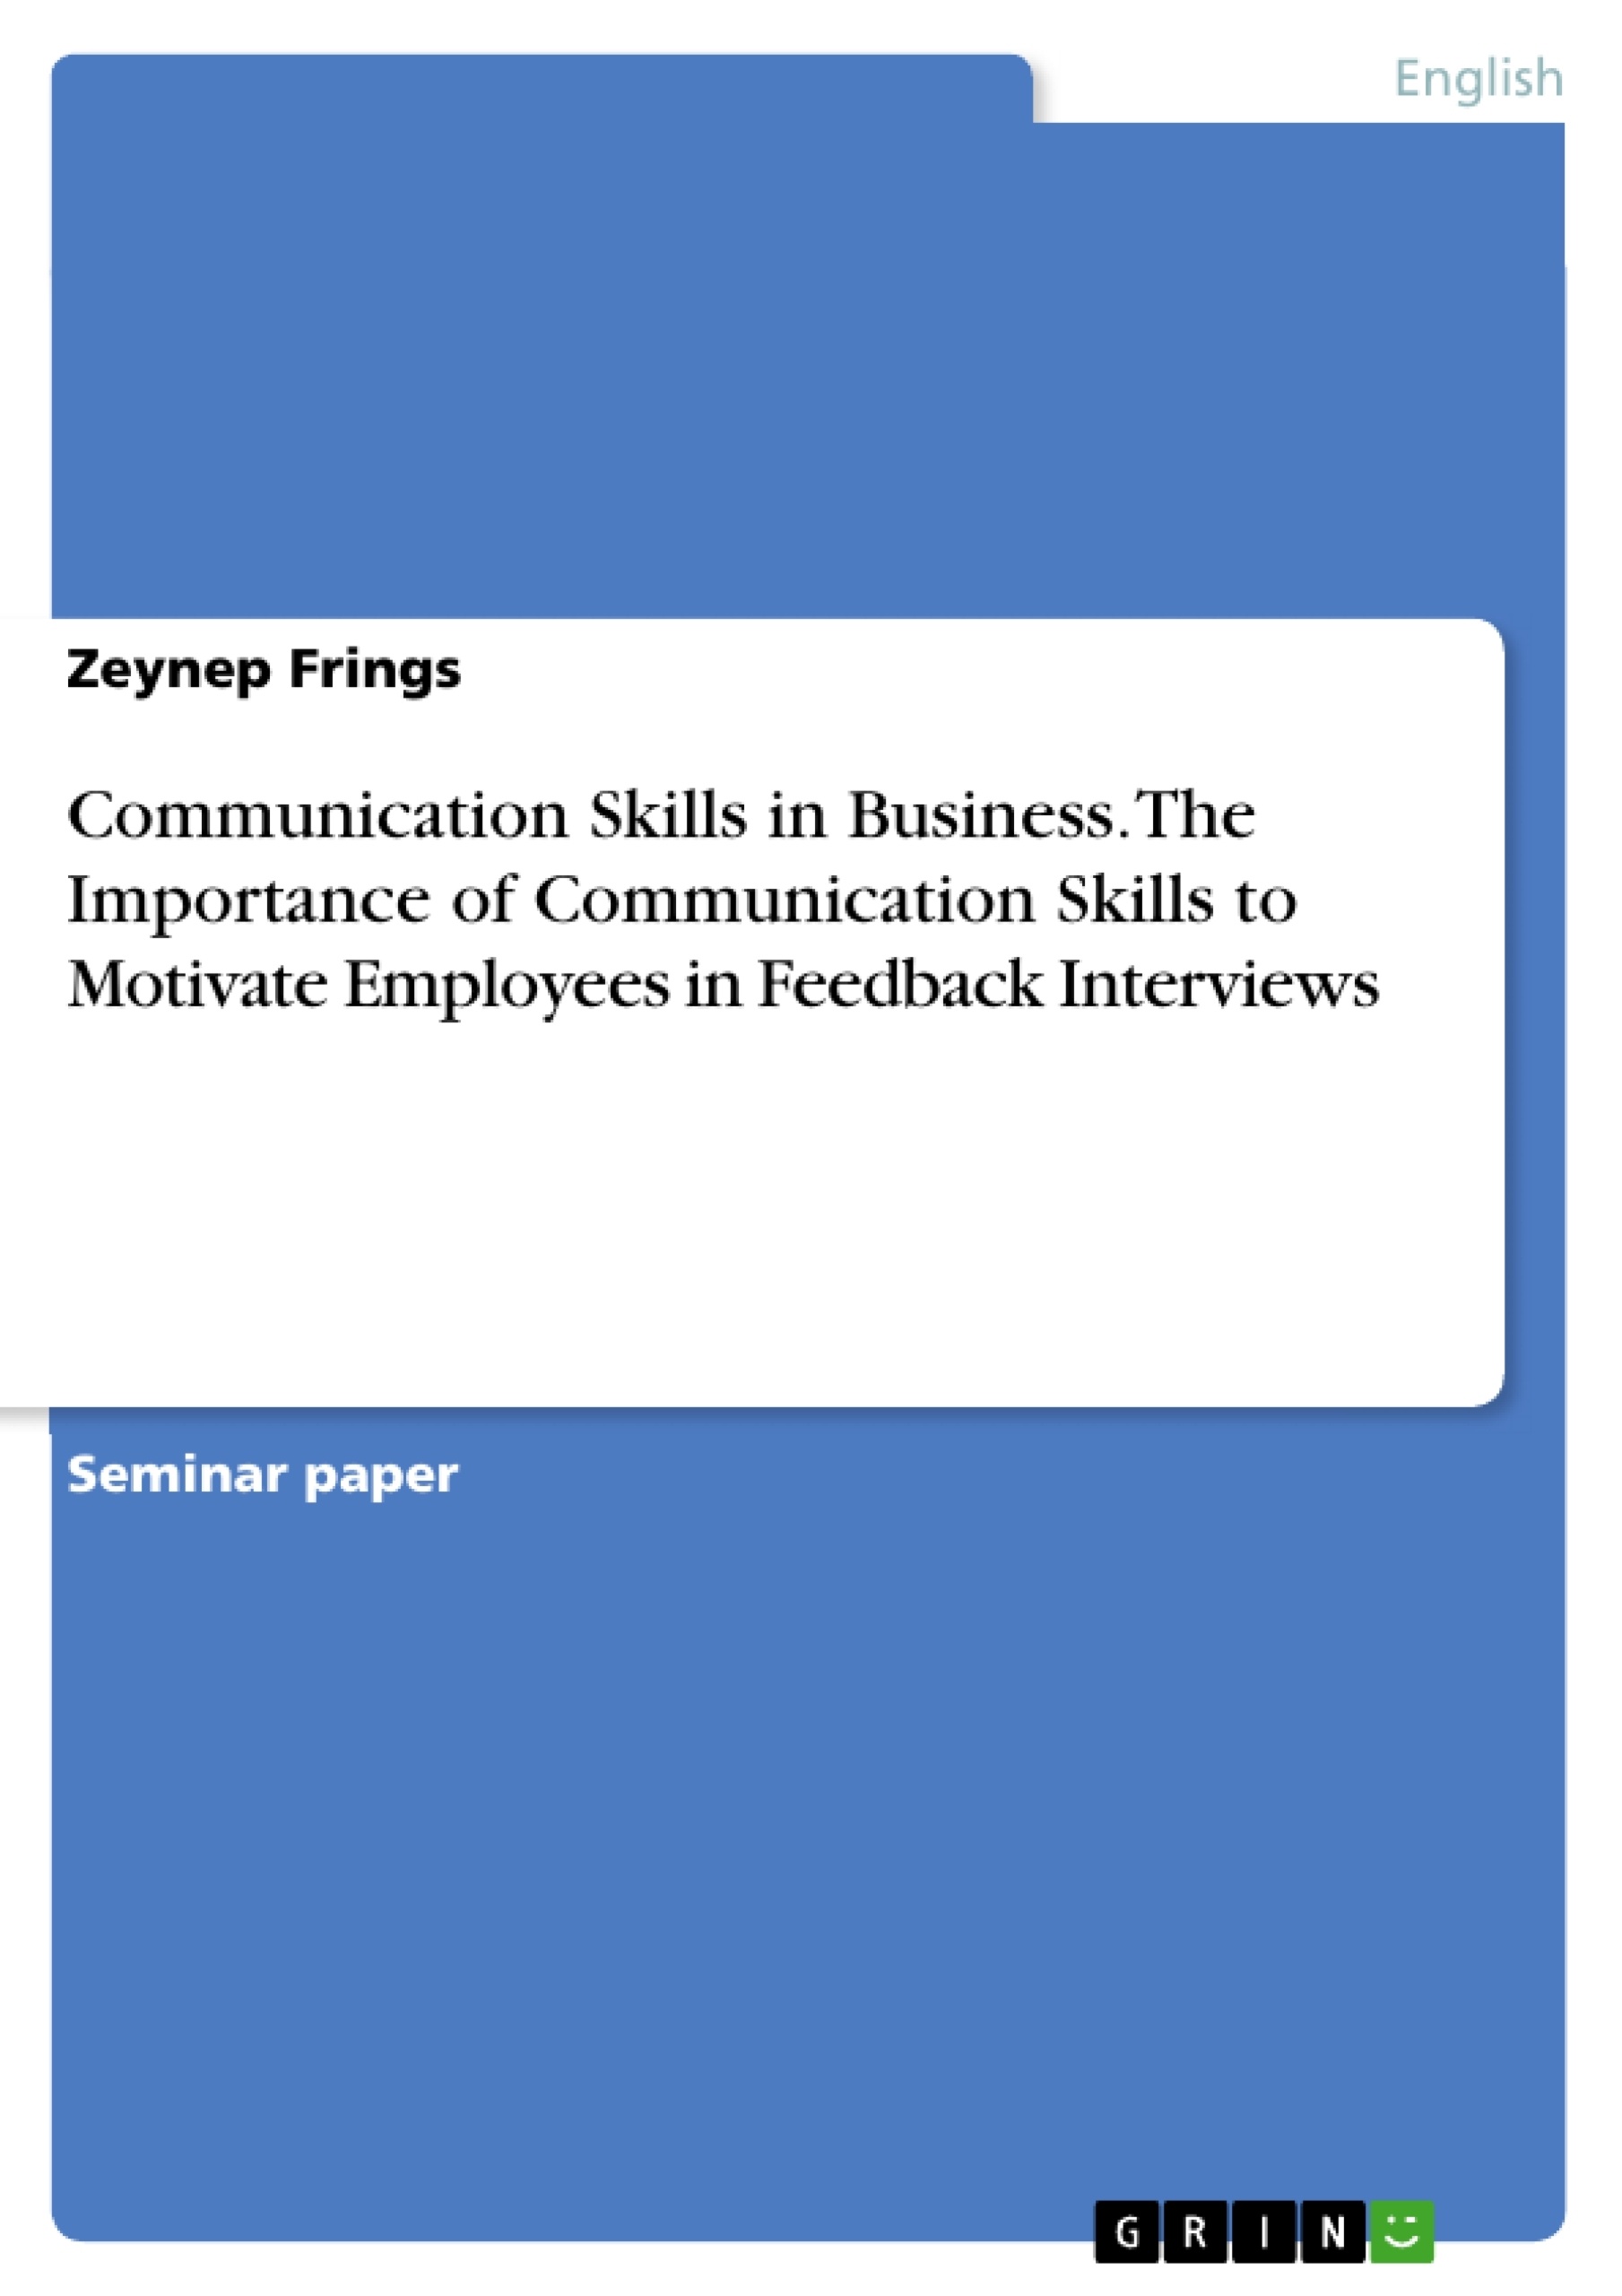 Title: Communication Skills in Business. The Importance of Communication Skills to Motivate Employees in Feedback Interviews